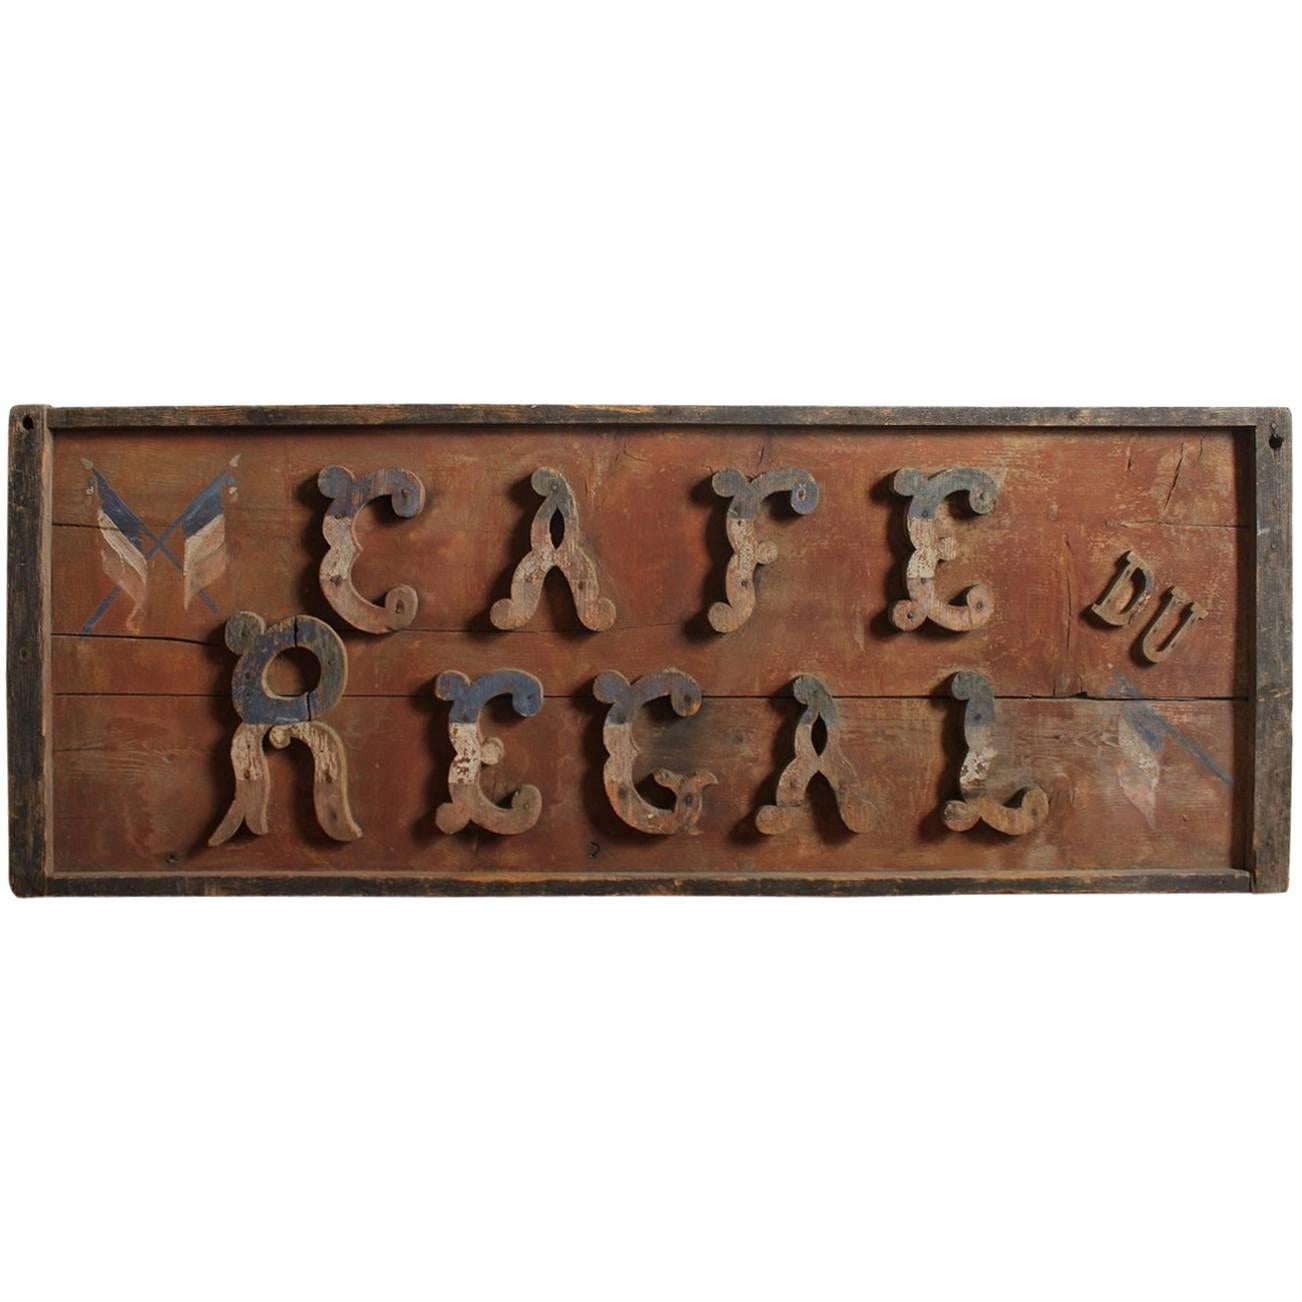 Late 1800s French Hand-Painted Wood Sign "Cafe Du Regal"